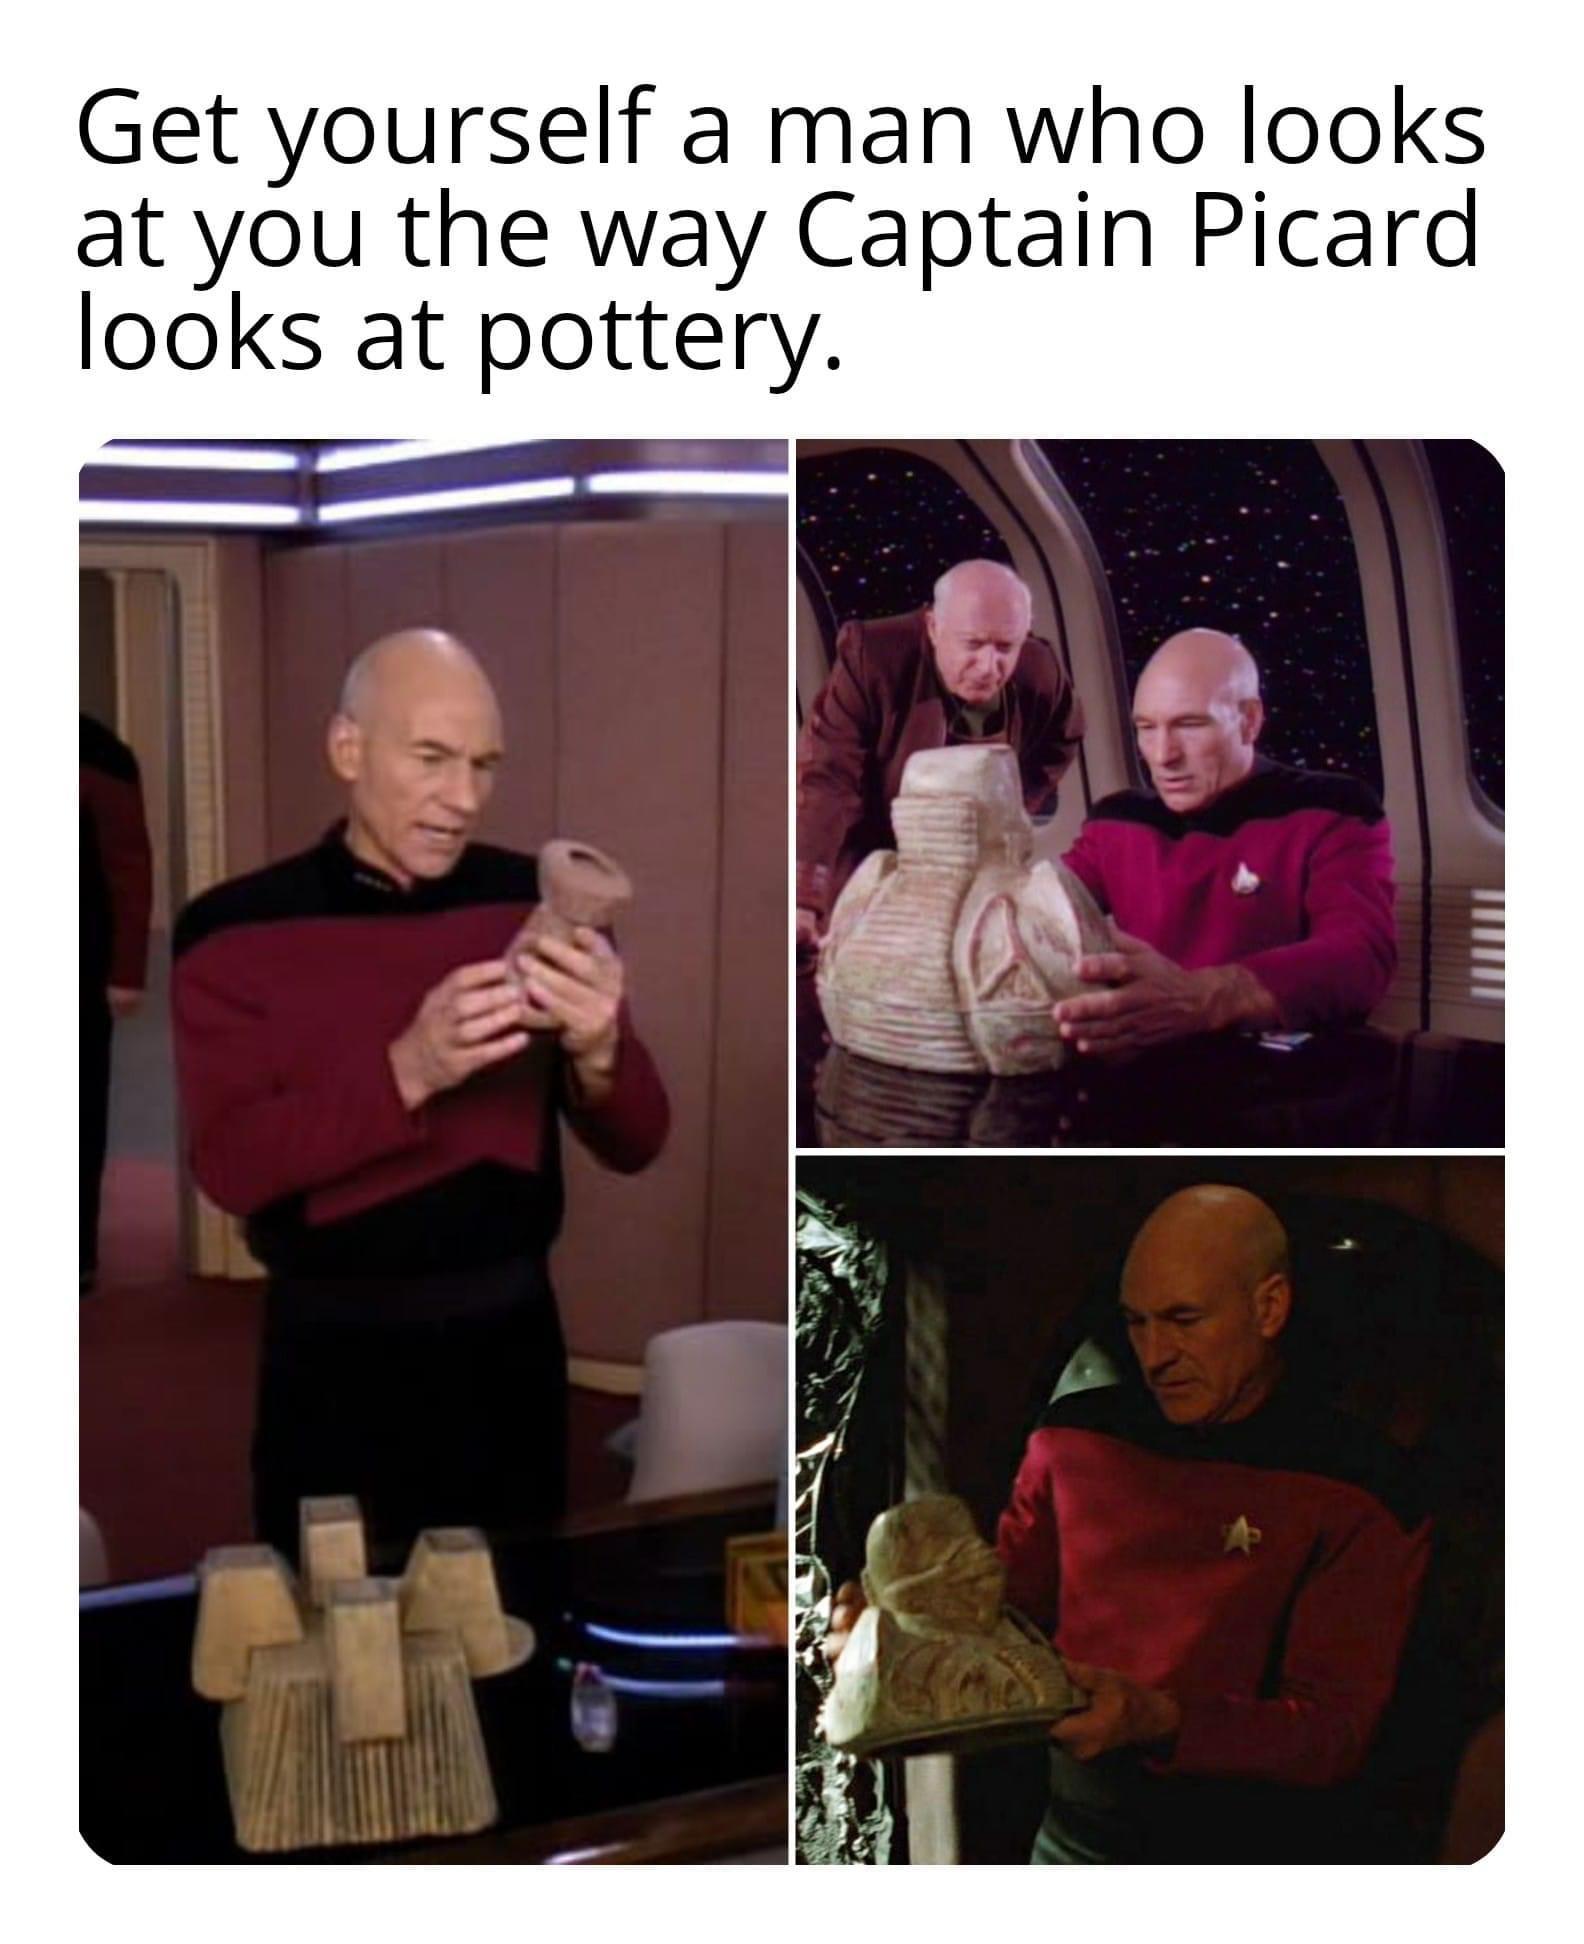 shoulder - Get yourself a man who looks at you the way Captain Picard looks at pottery.